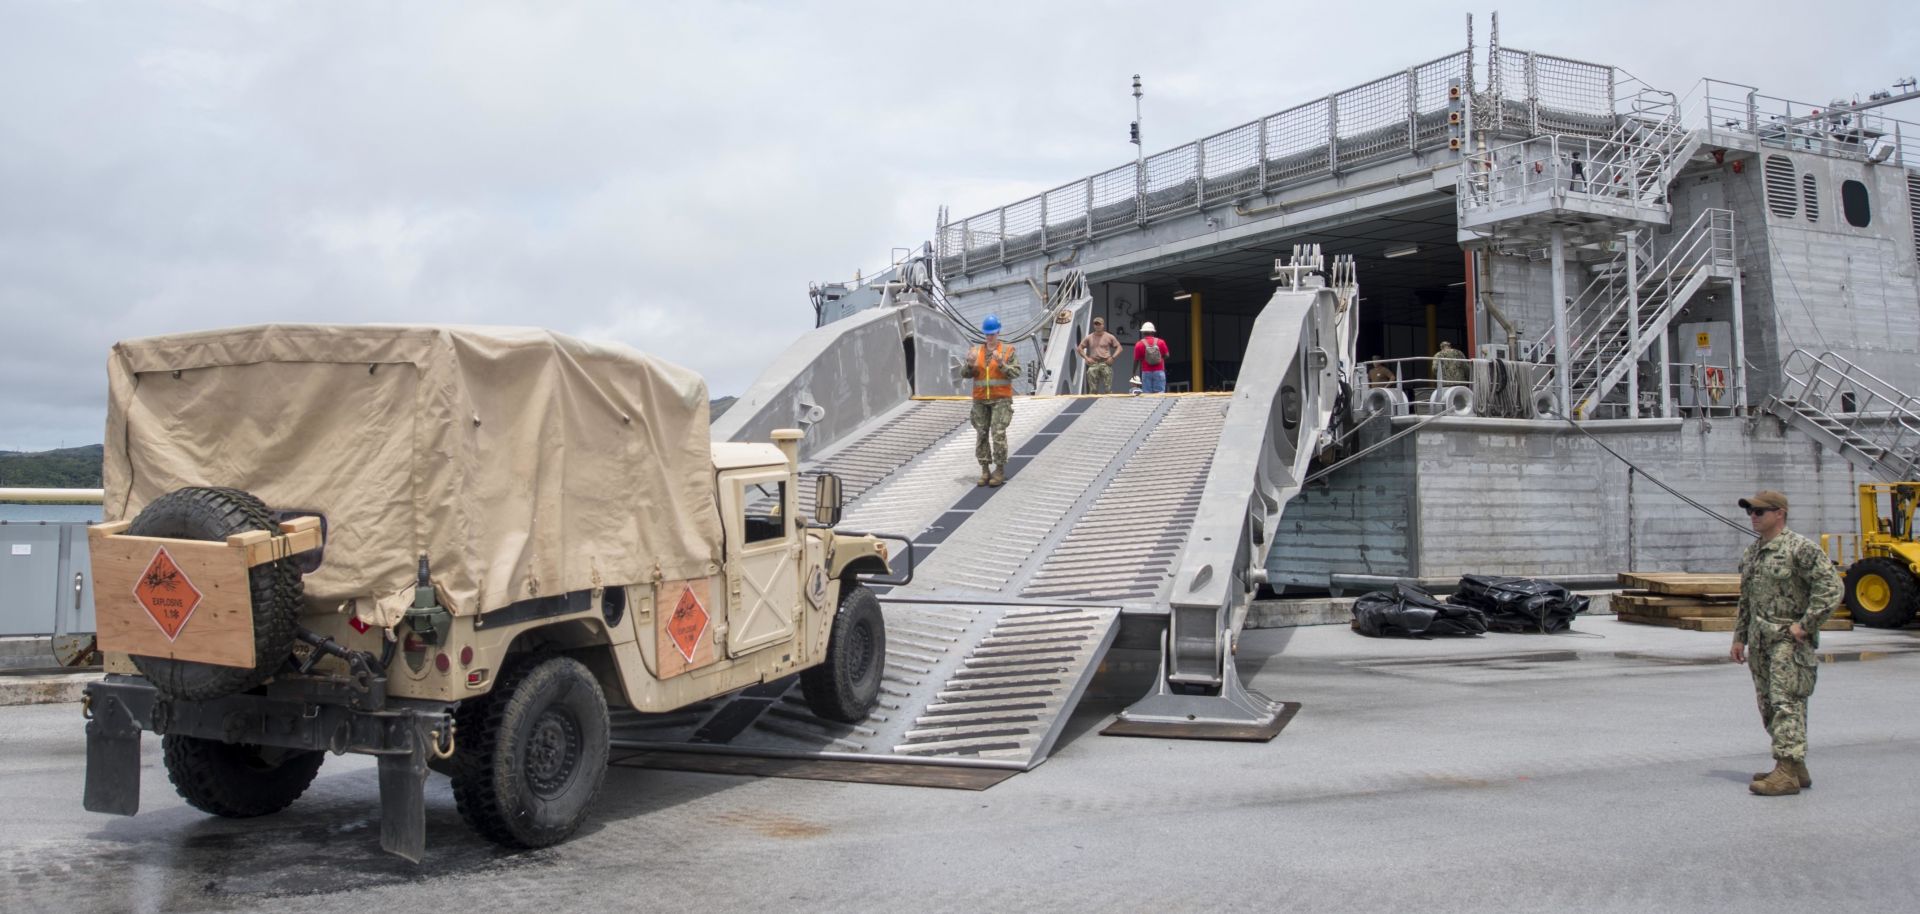 Sailors attached to Navy Cargo Handling Battalion 1 with Detachment Guam move supplies from a naval base in Guam to the fast transport ship USNS Brunswick on Sept. 1, 2018.